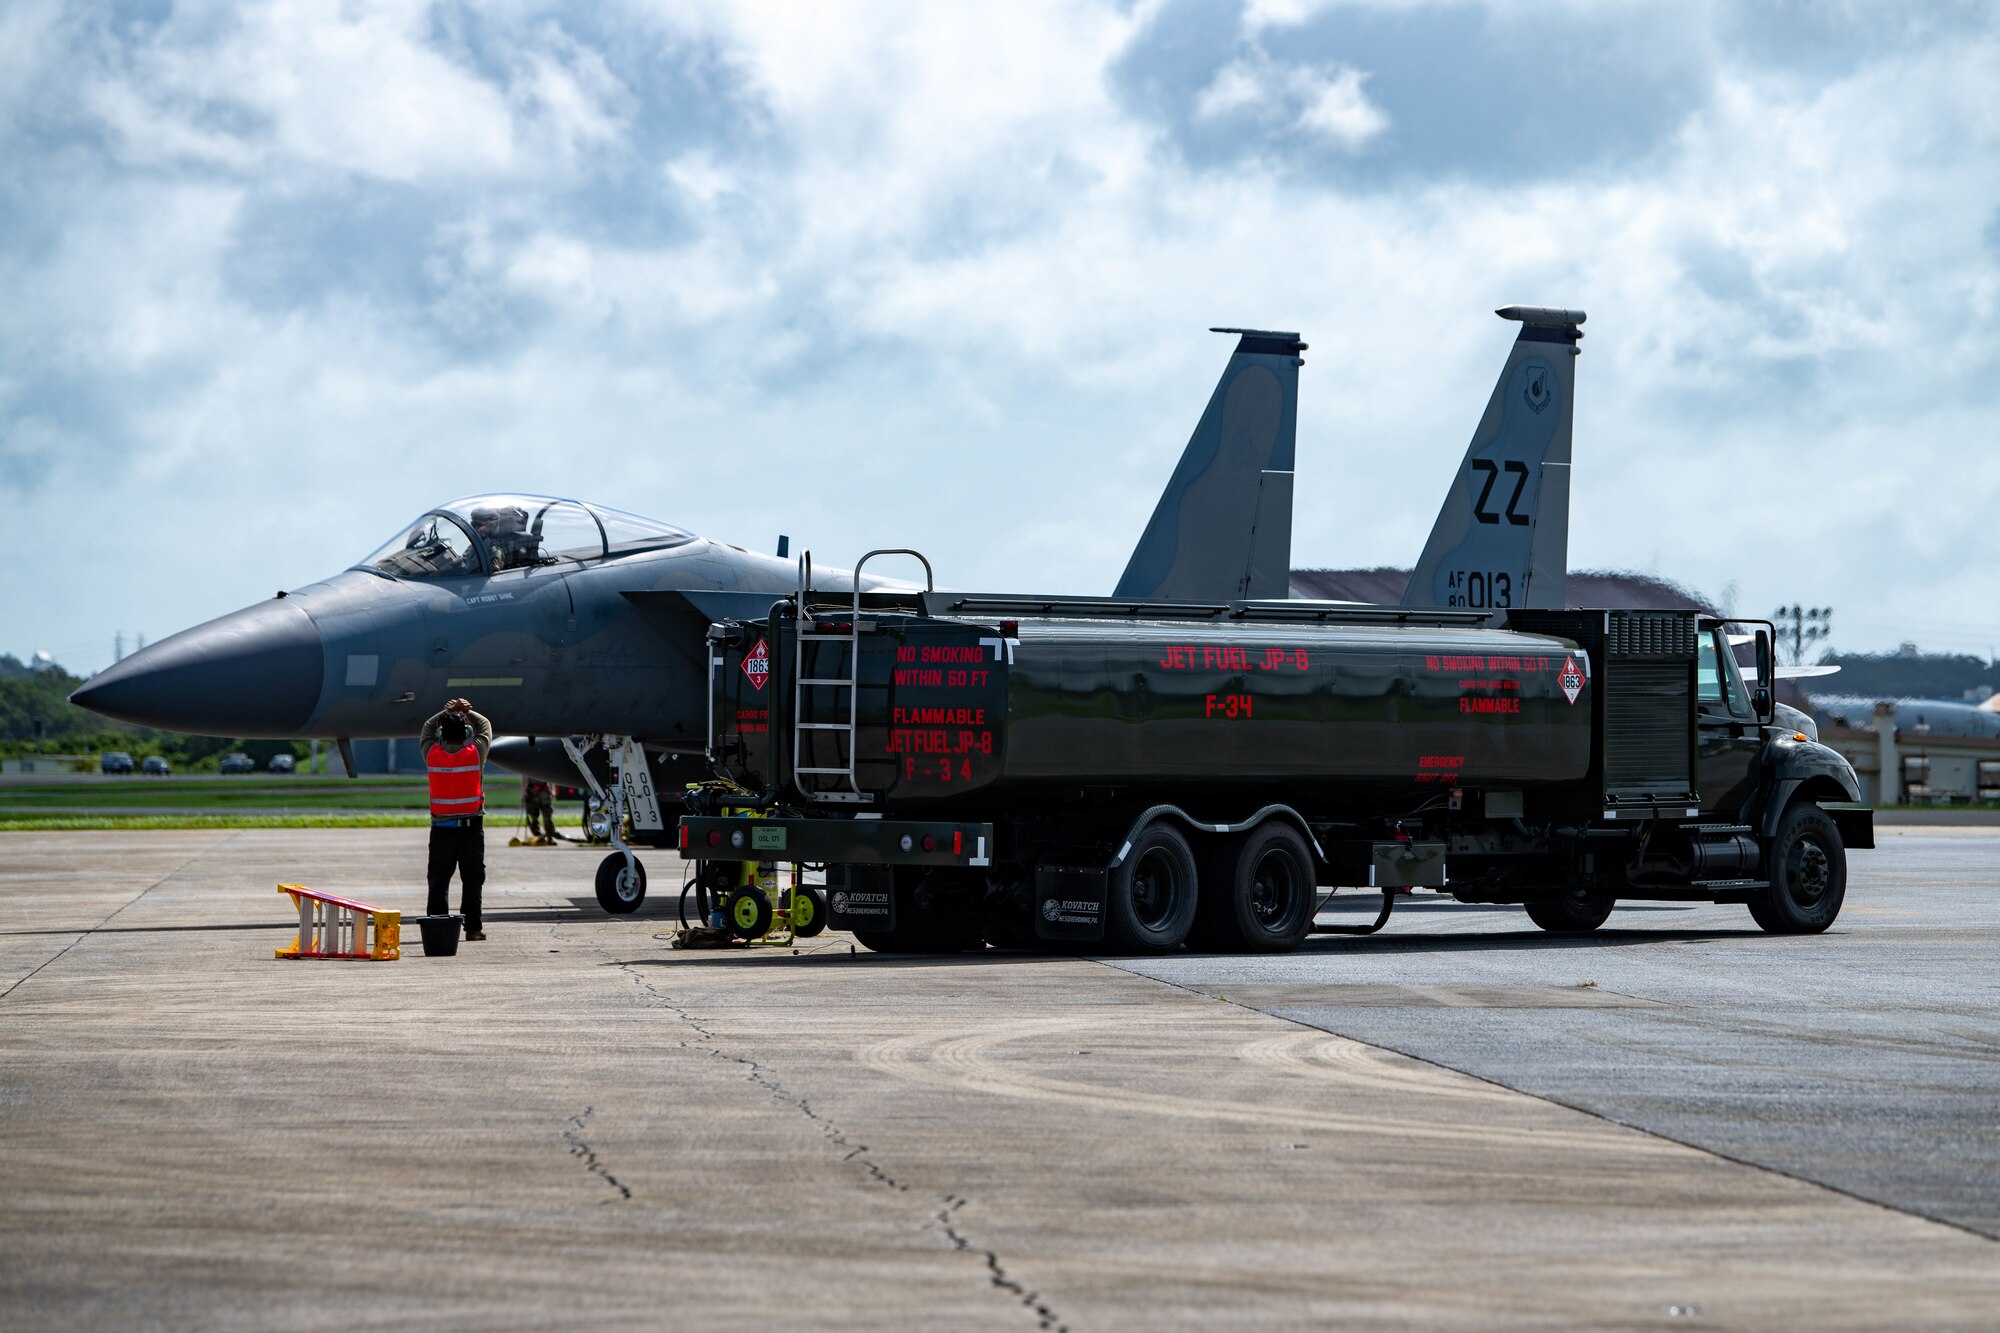 An Airman directs a jet for refueling.